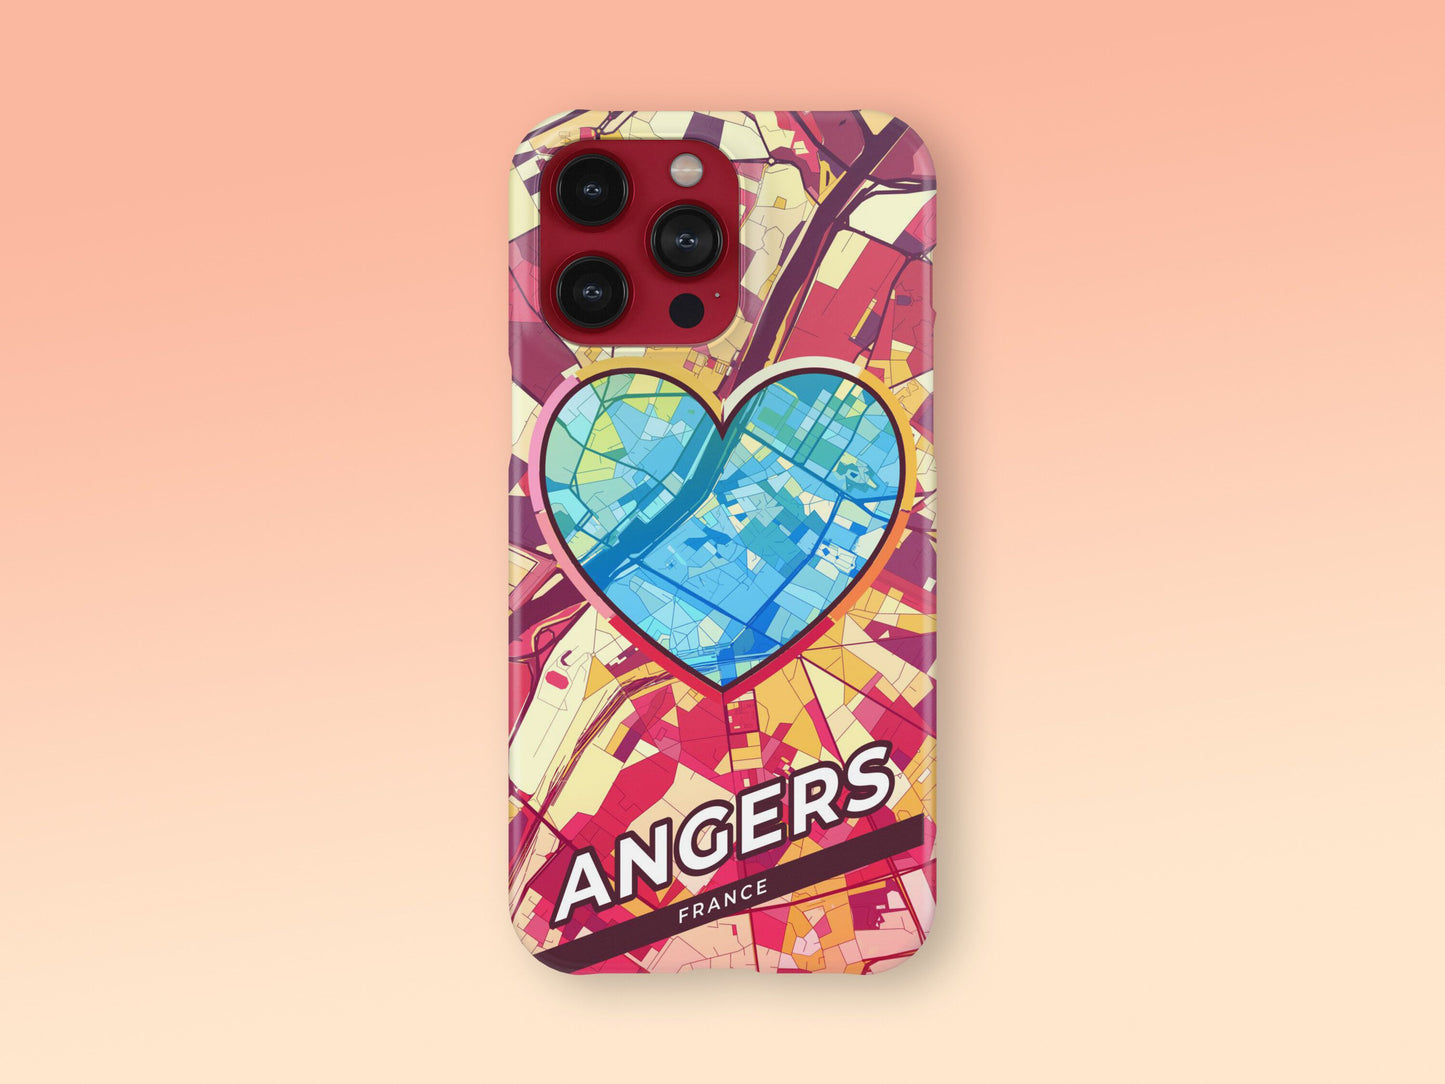 Angers France slim phone case with colorful icon. Birthday, wedding or housewarming gift. Couple match cases. 2